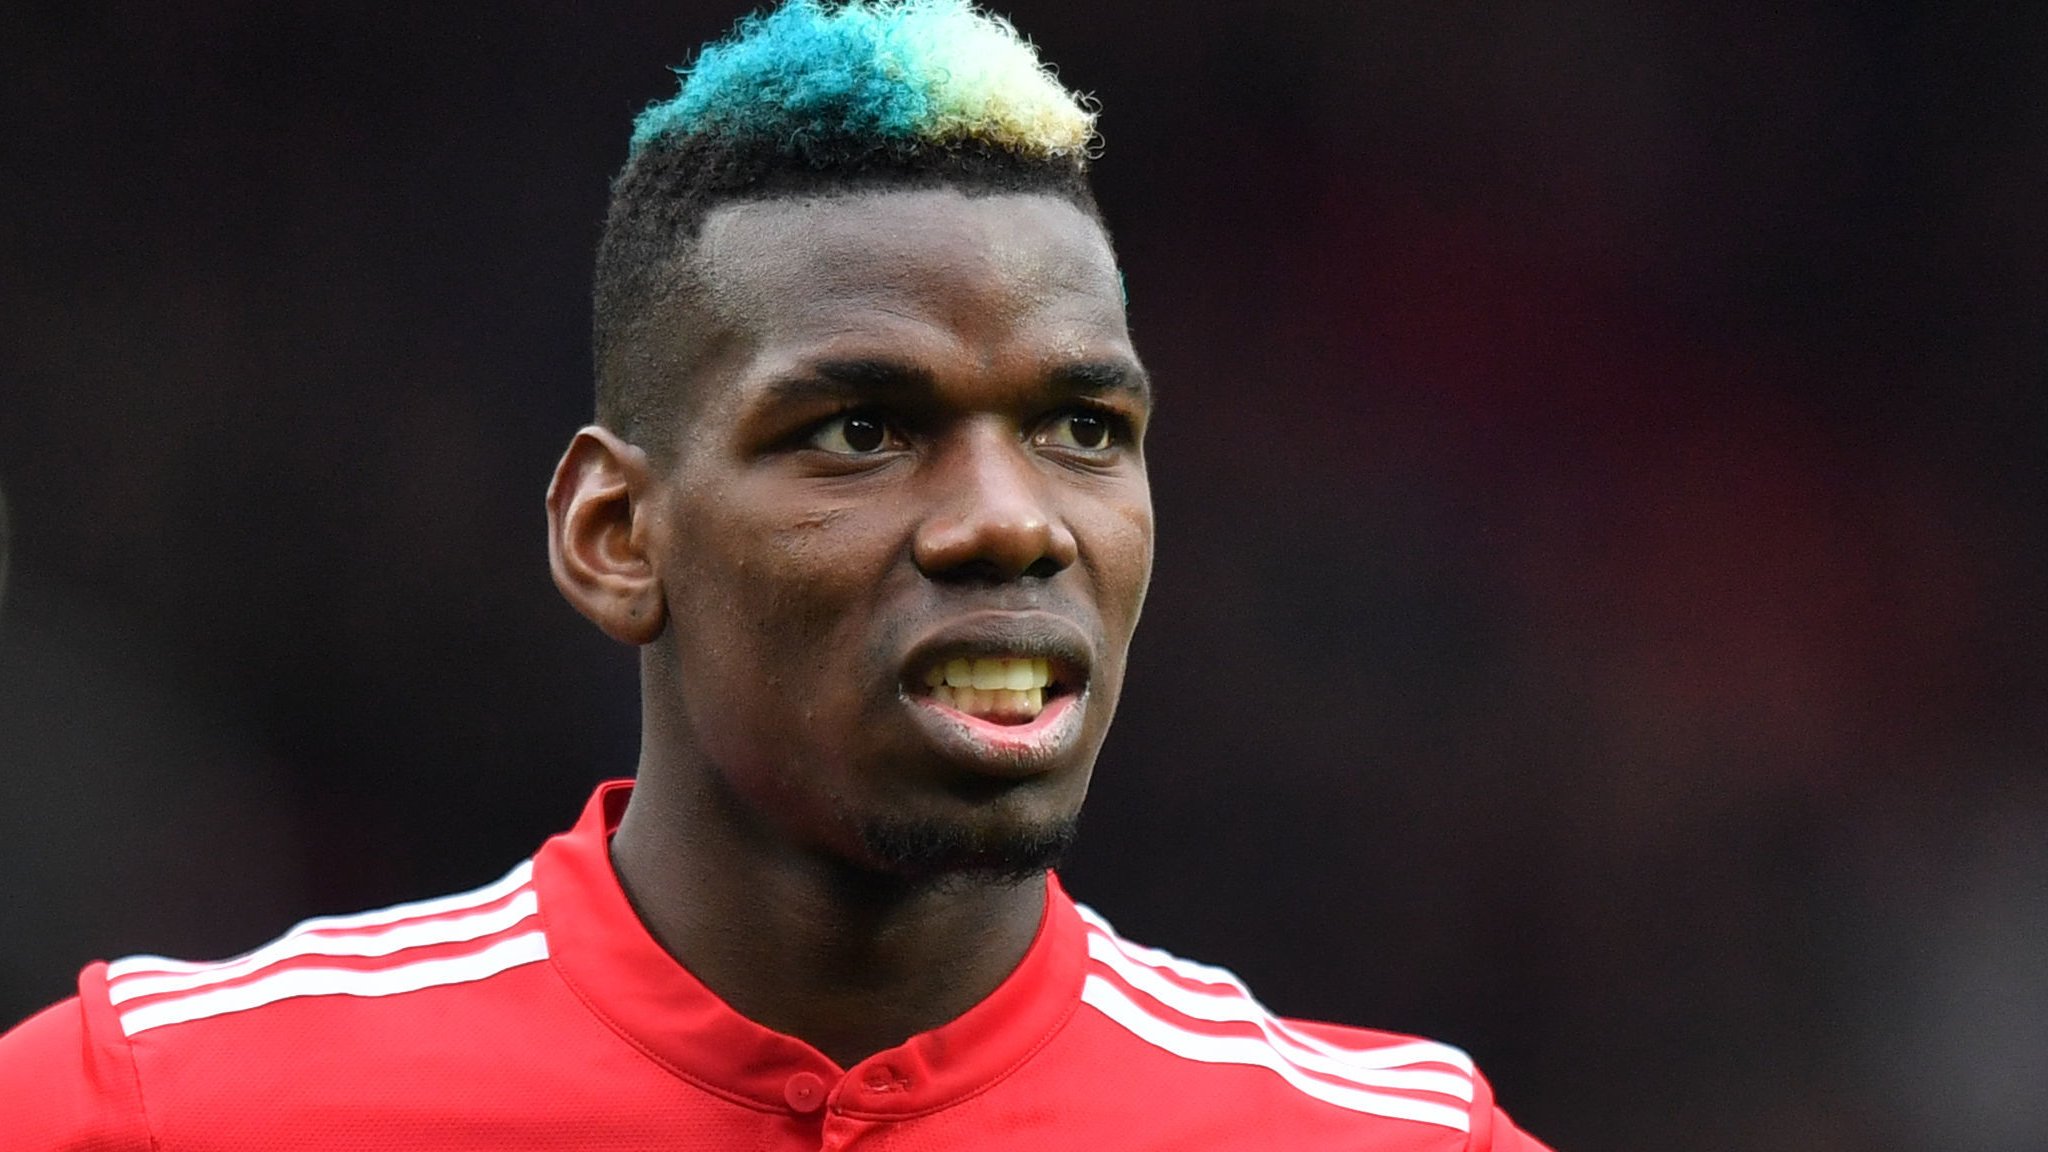 Mourinho concerned about damage Pogba's agent is doing to Man Utd - Friday's gossip